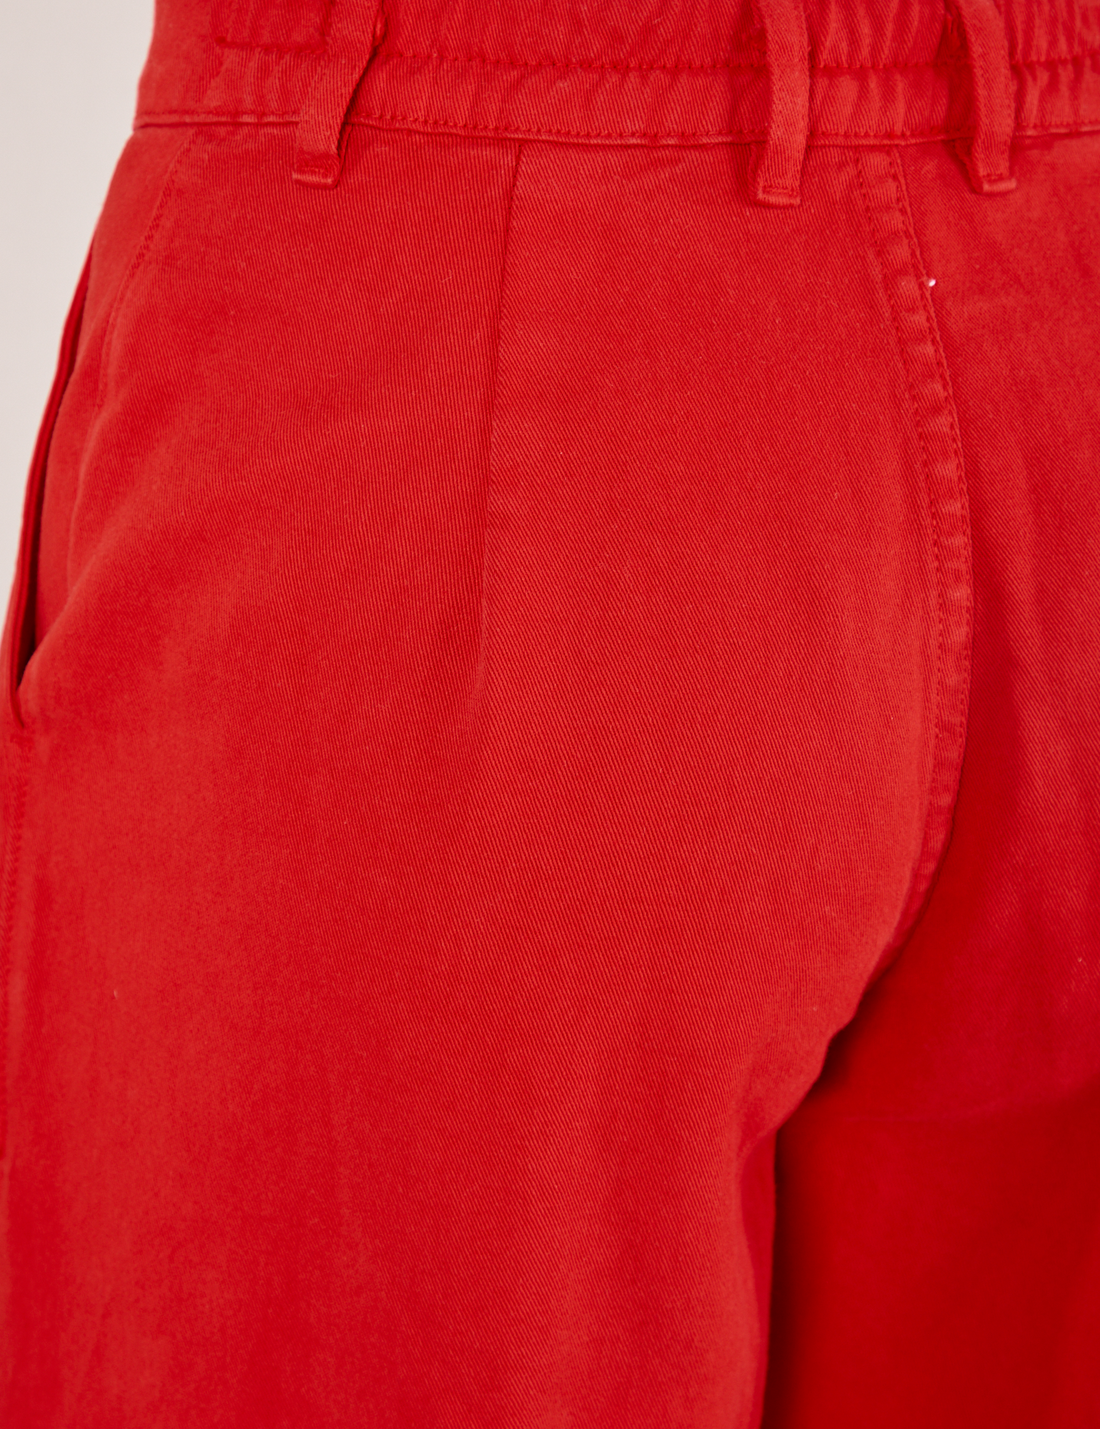 Back view close up of Heavyweight Trousers in Mustang Red worn by Jesse